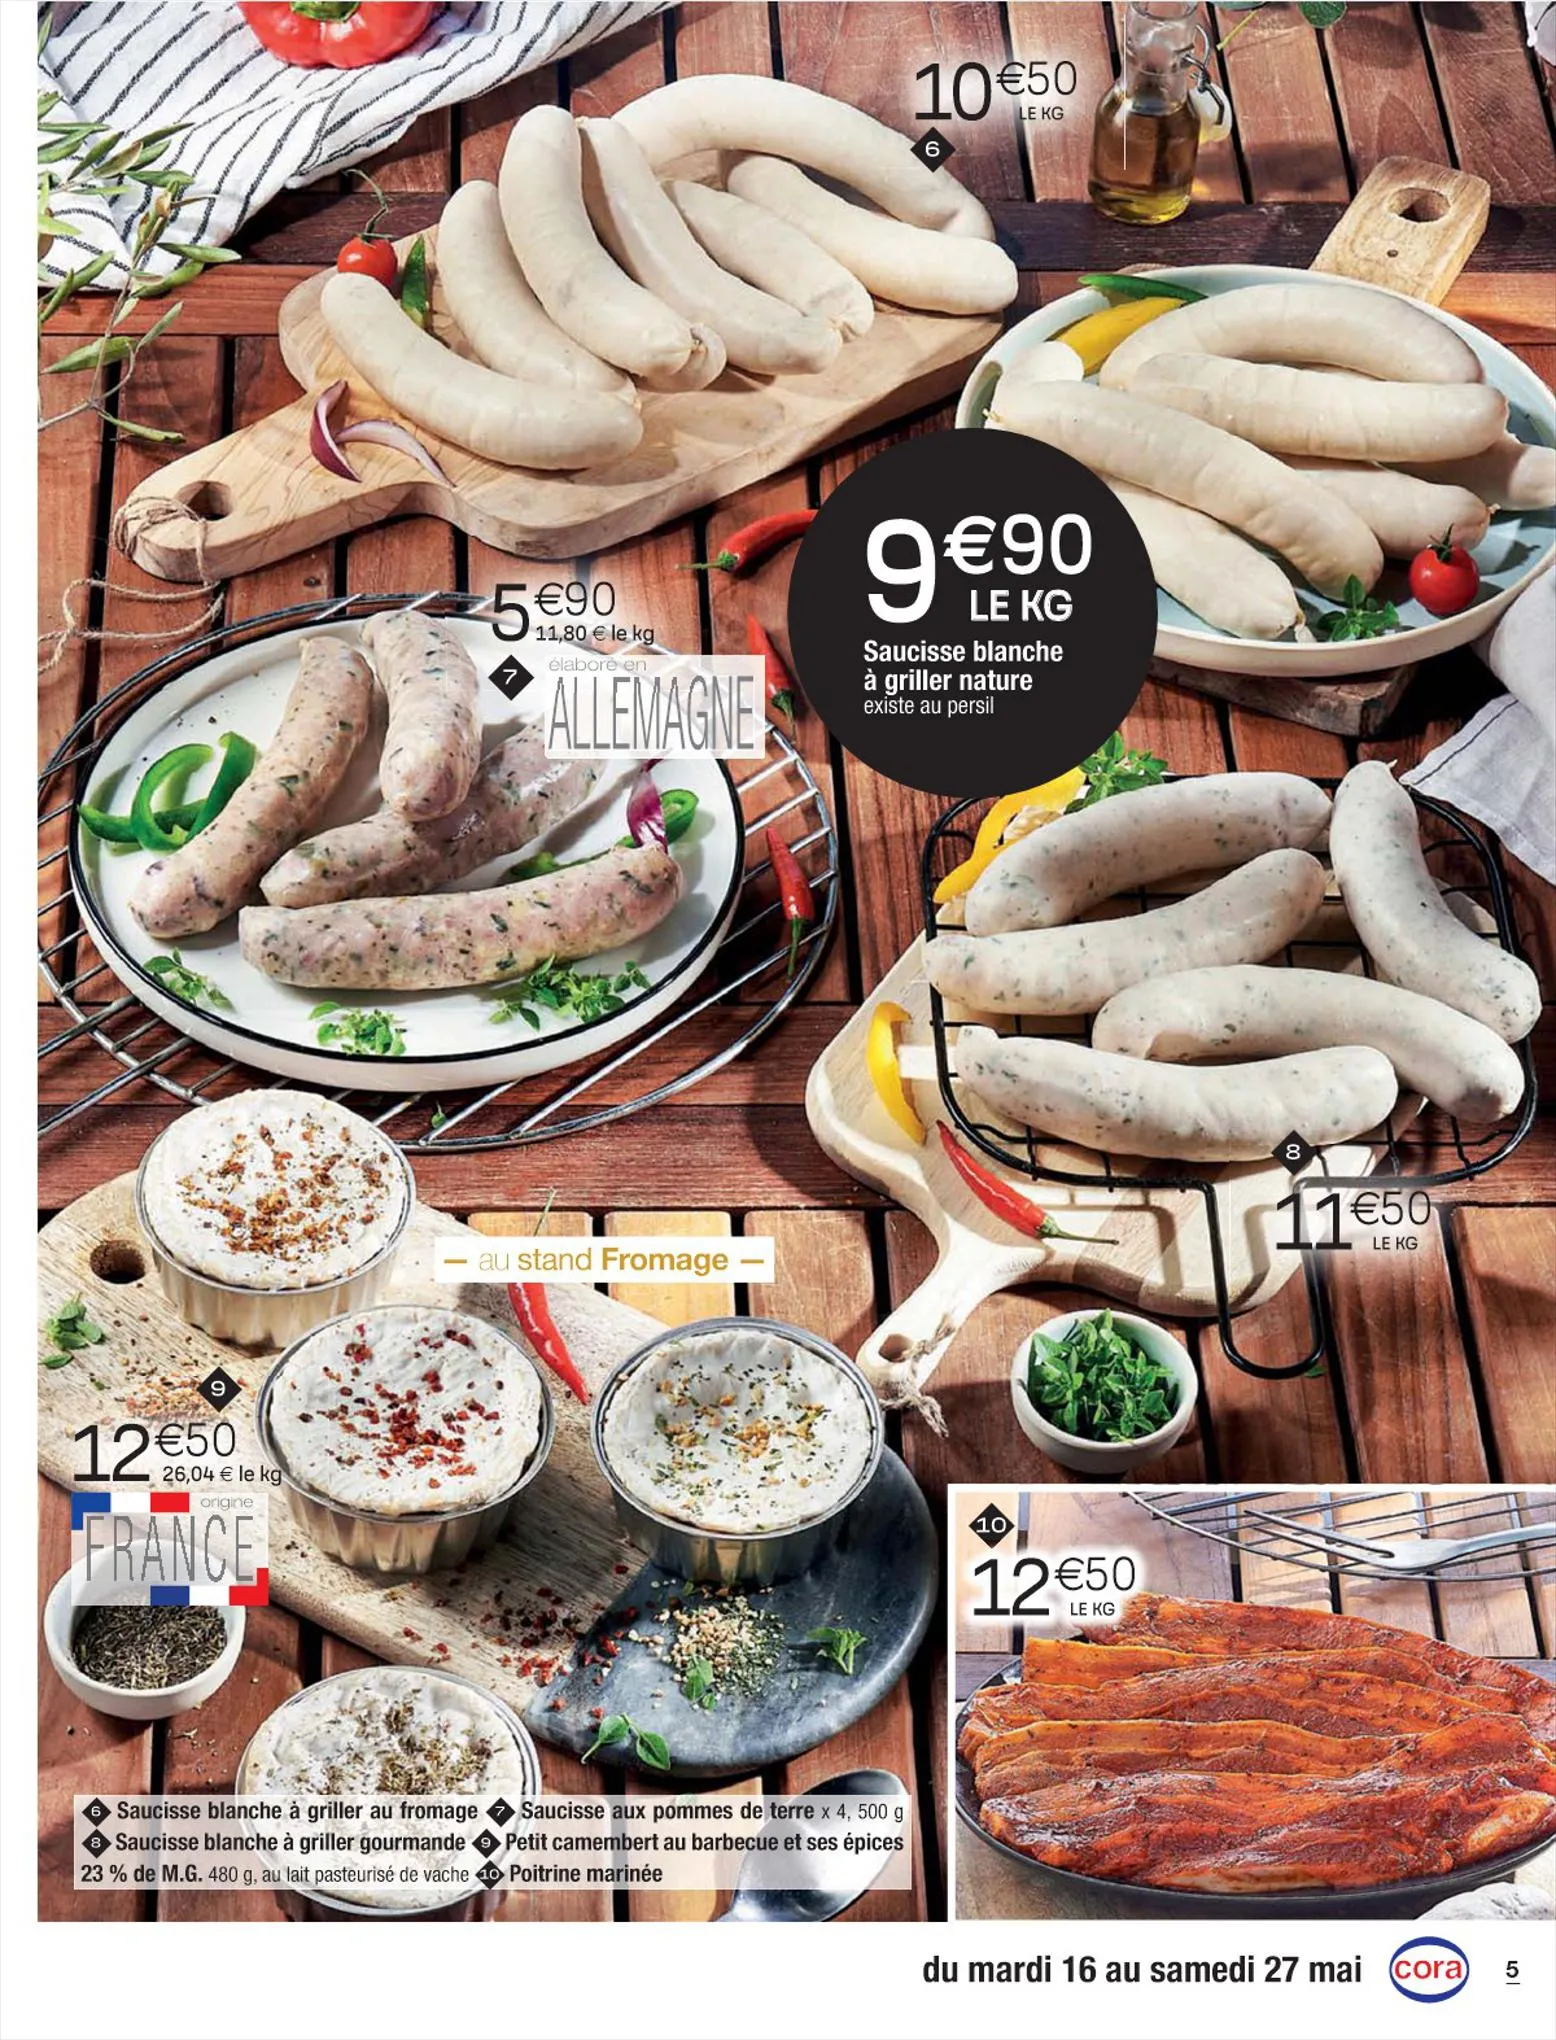 Catalogue Spécial barbecue, page 00005